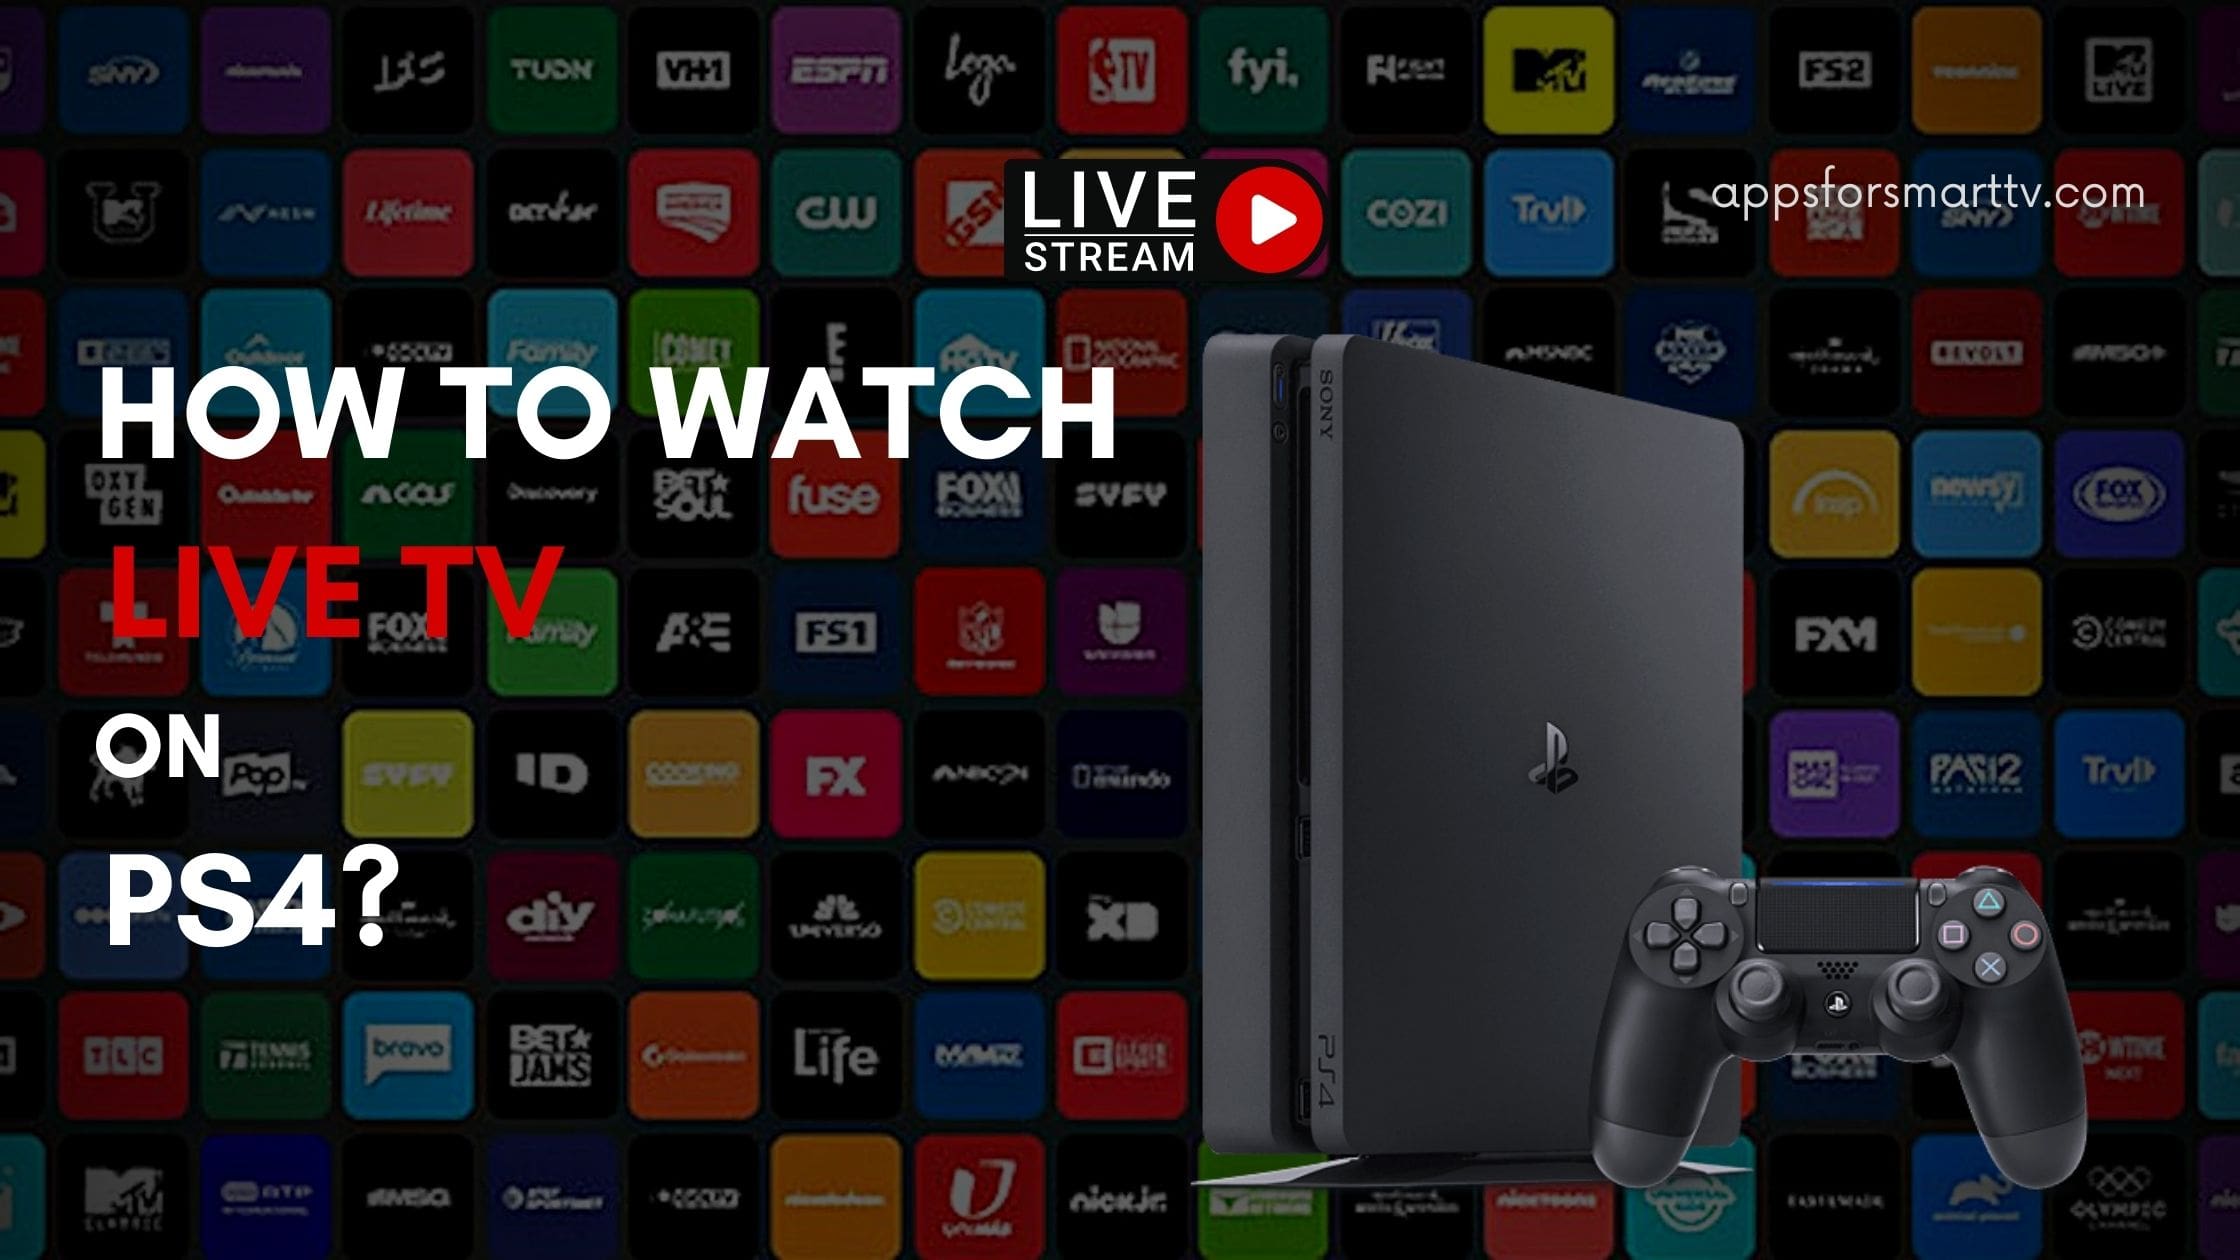 How to Watch Live TV on PS4 [16 Live Streaming Apps]